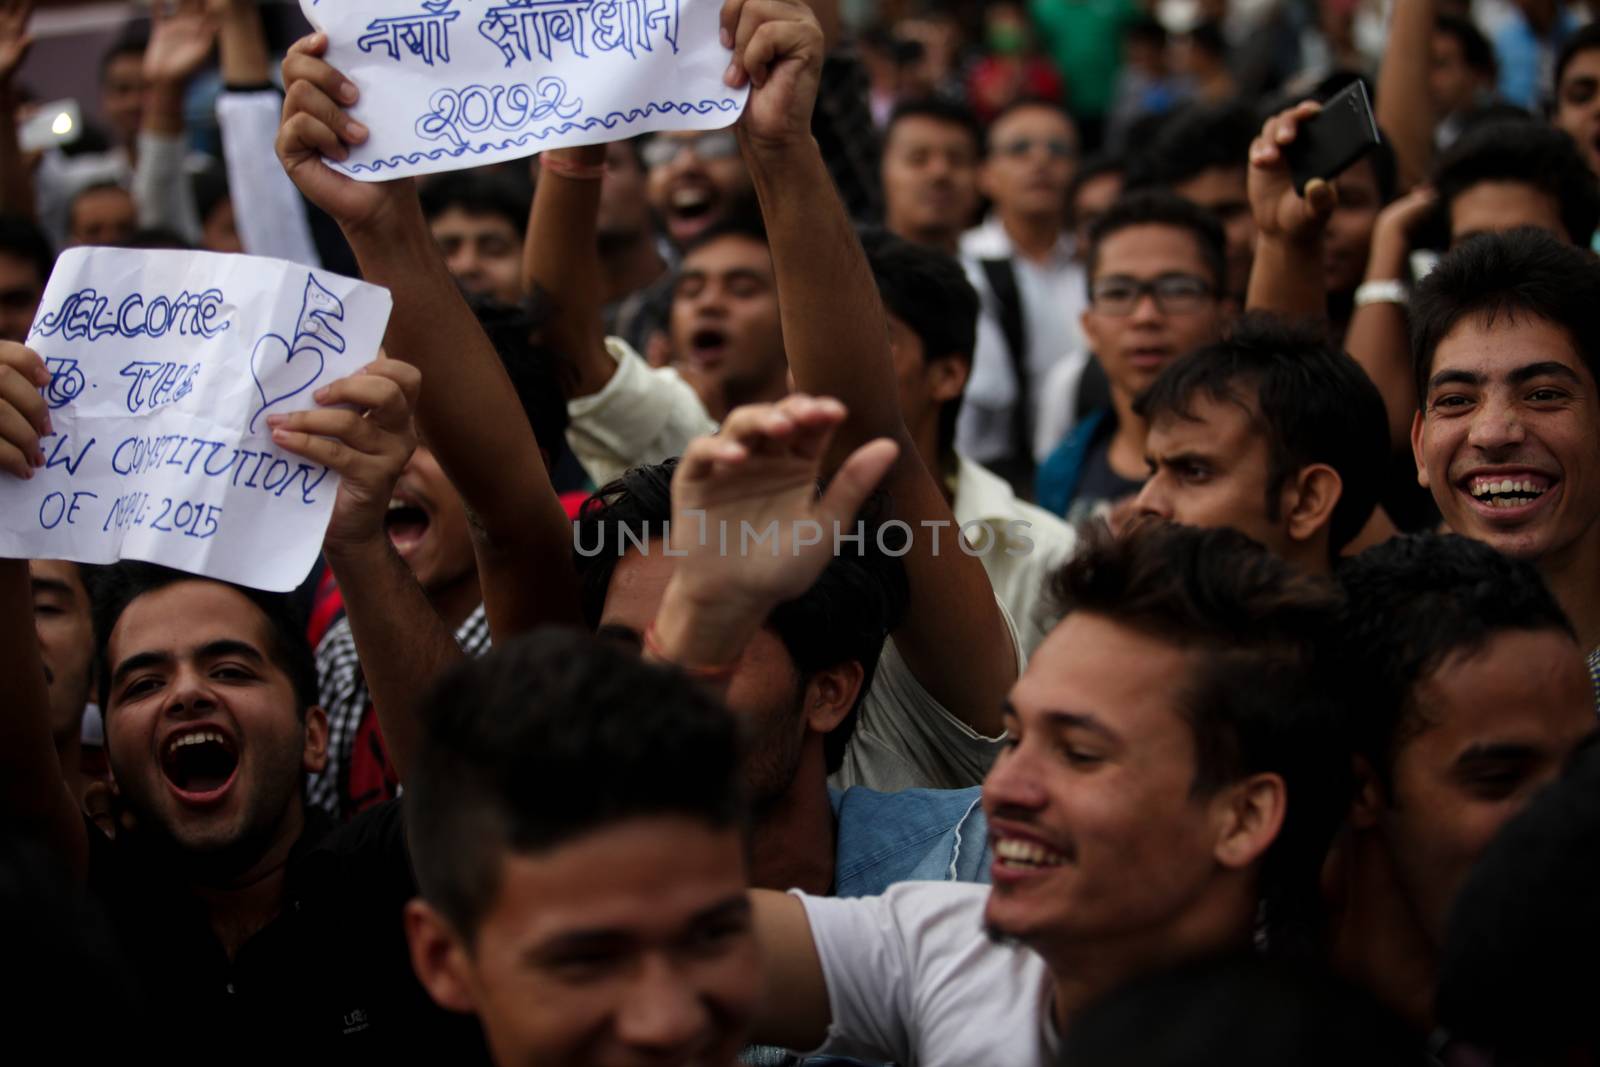 NEPAL, Kathmandu: After years of debate, Nepal adopted a new constitution on September 20, 2015, prompting scores of residents to celebrate near the constituent assembly building in Kathmandu. Out of the 598 members of the Constituent Assembly, 507 voted for the new constitution, 25 voted against, and 66 abstained in a vote on September 16, 2015. The event was marked with fireworks and fesitivities, but also with protests organized by parties of the Tharu and Madhesi ethnic communities.